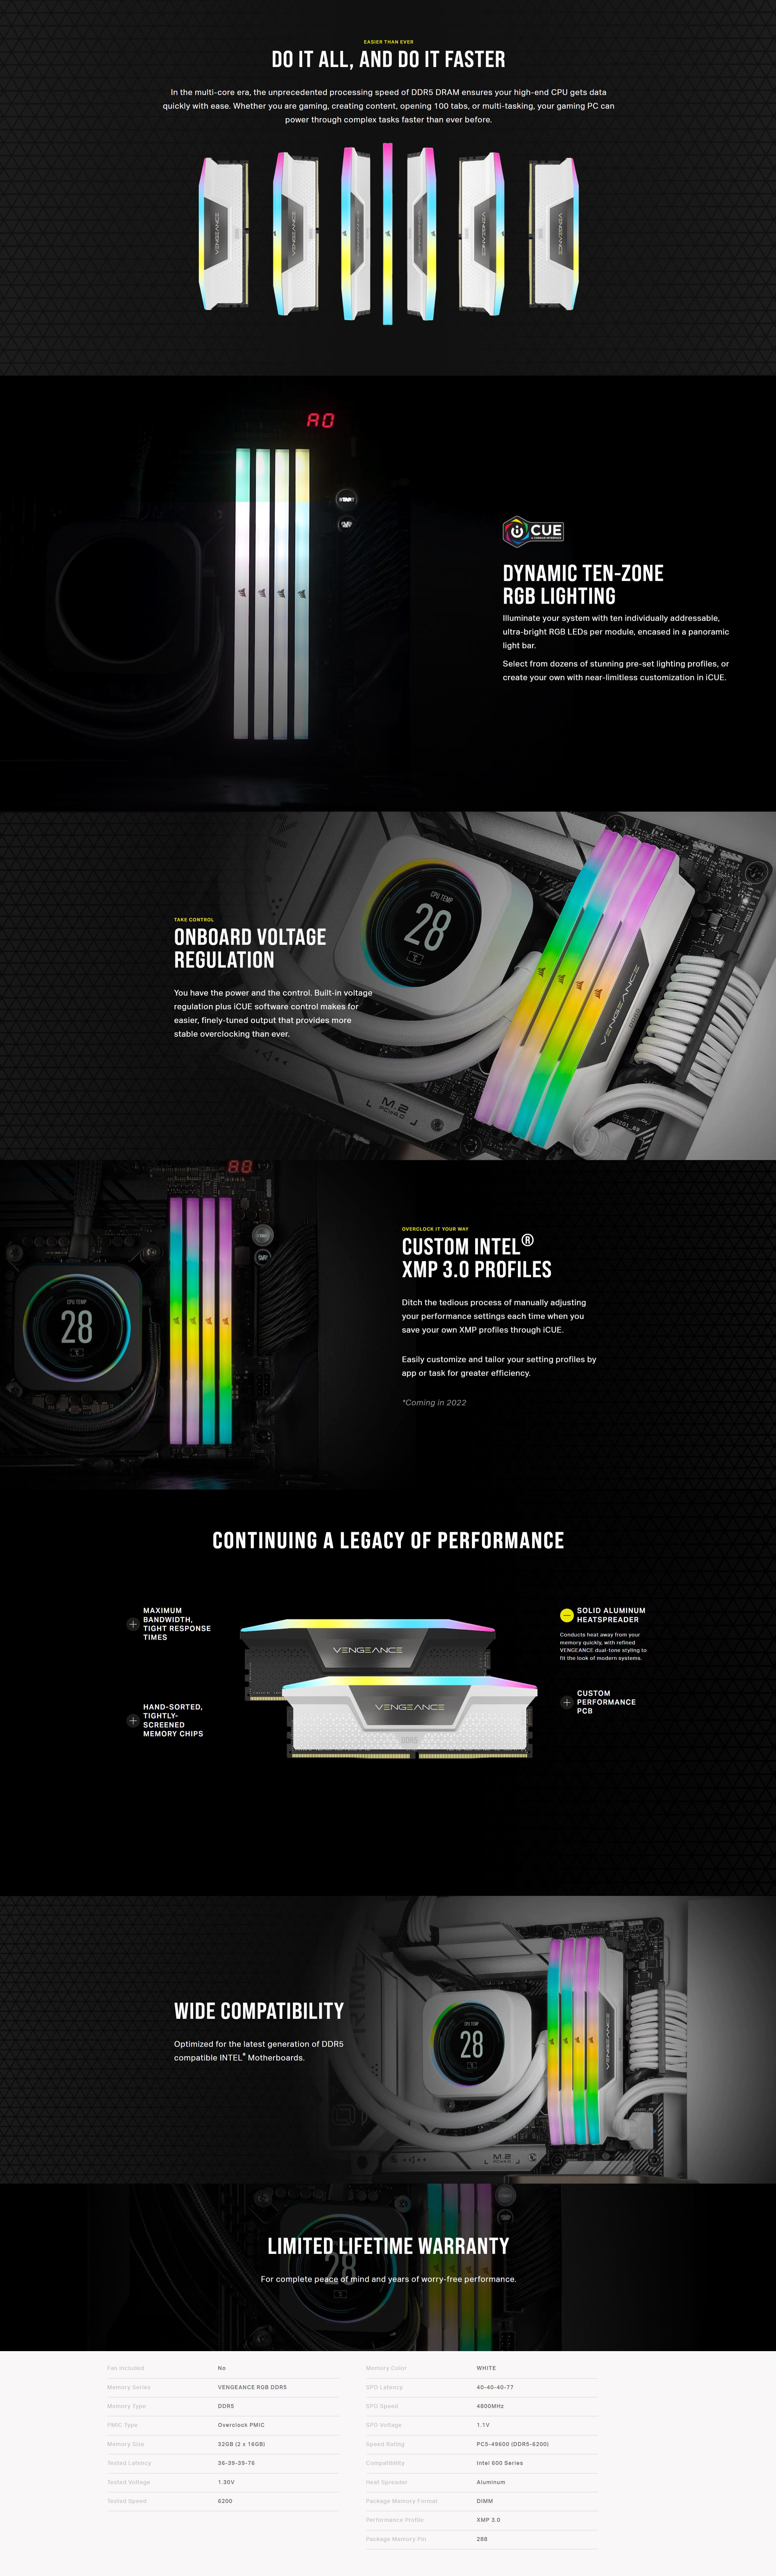 A large marketing image providing additional information about the product Corsair 32GB Kit (2x16GB) DDR5 Vengeance RGB C36 6200MT/s - Black - Additional alt info not provided